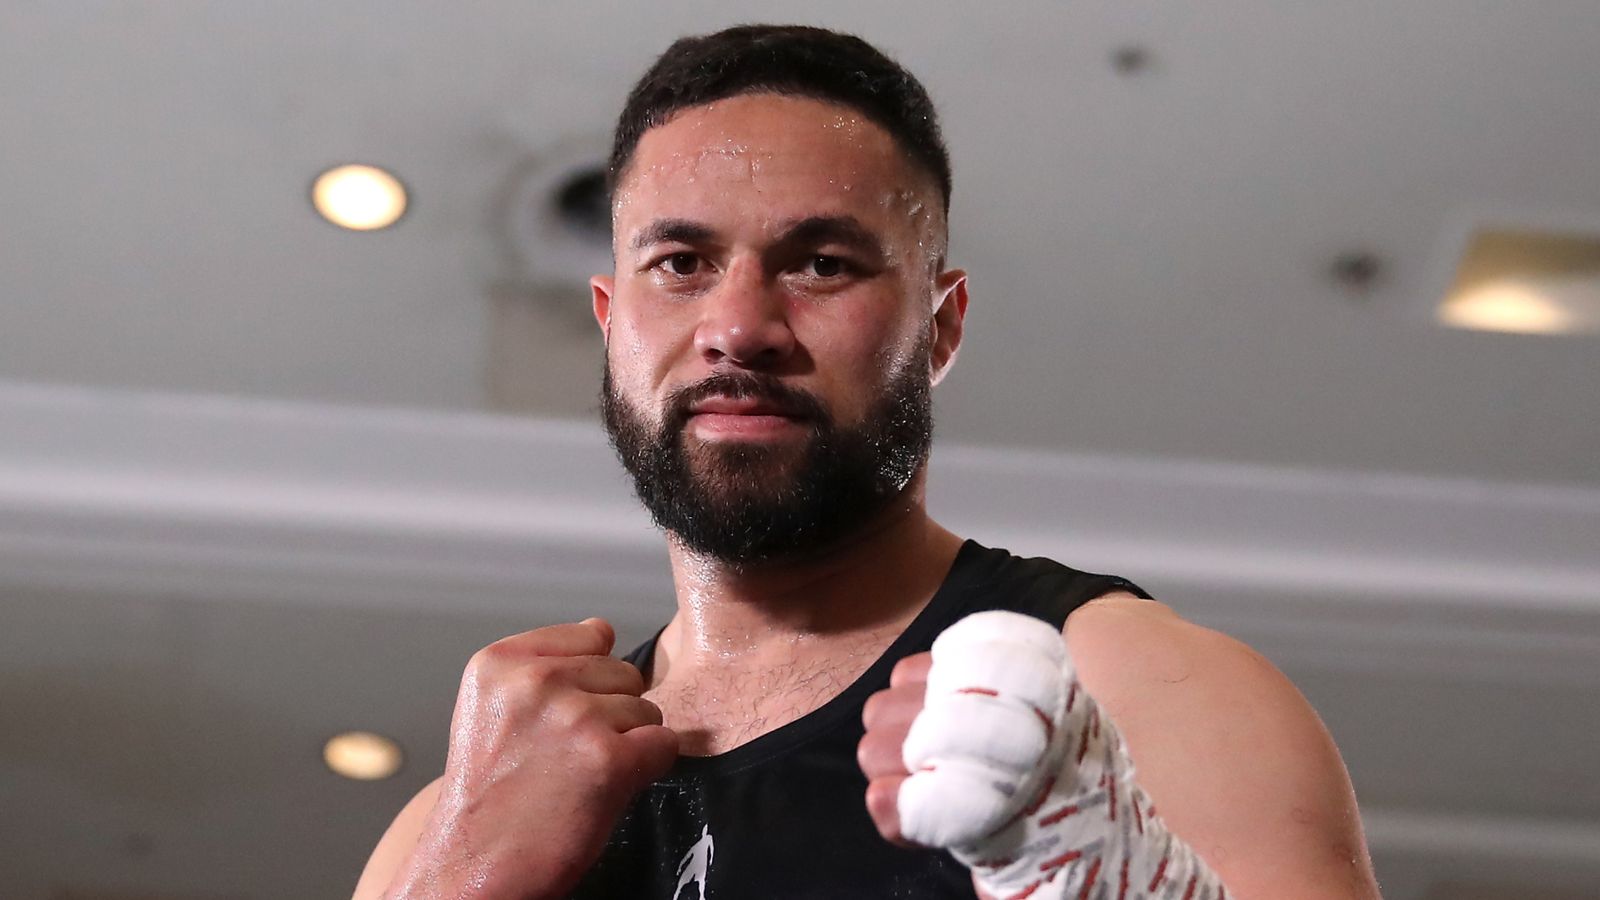 Joseph Parker sacrifices Christmas in NZ to stay in UK and prepare for fight: ‘Tyson Fury has invited me over’